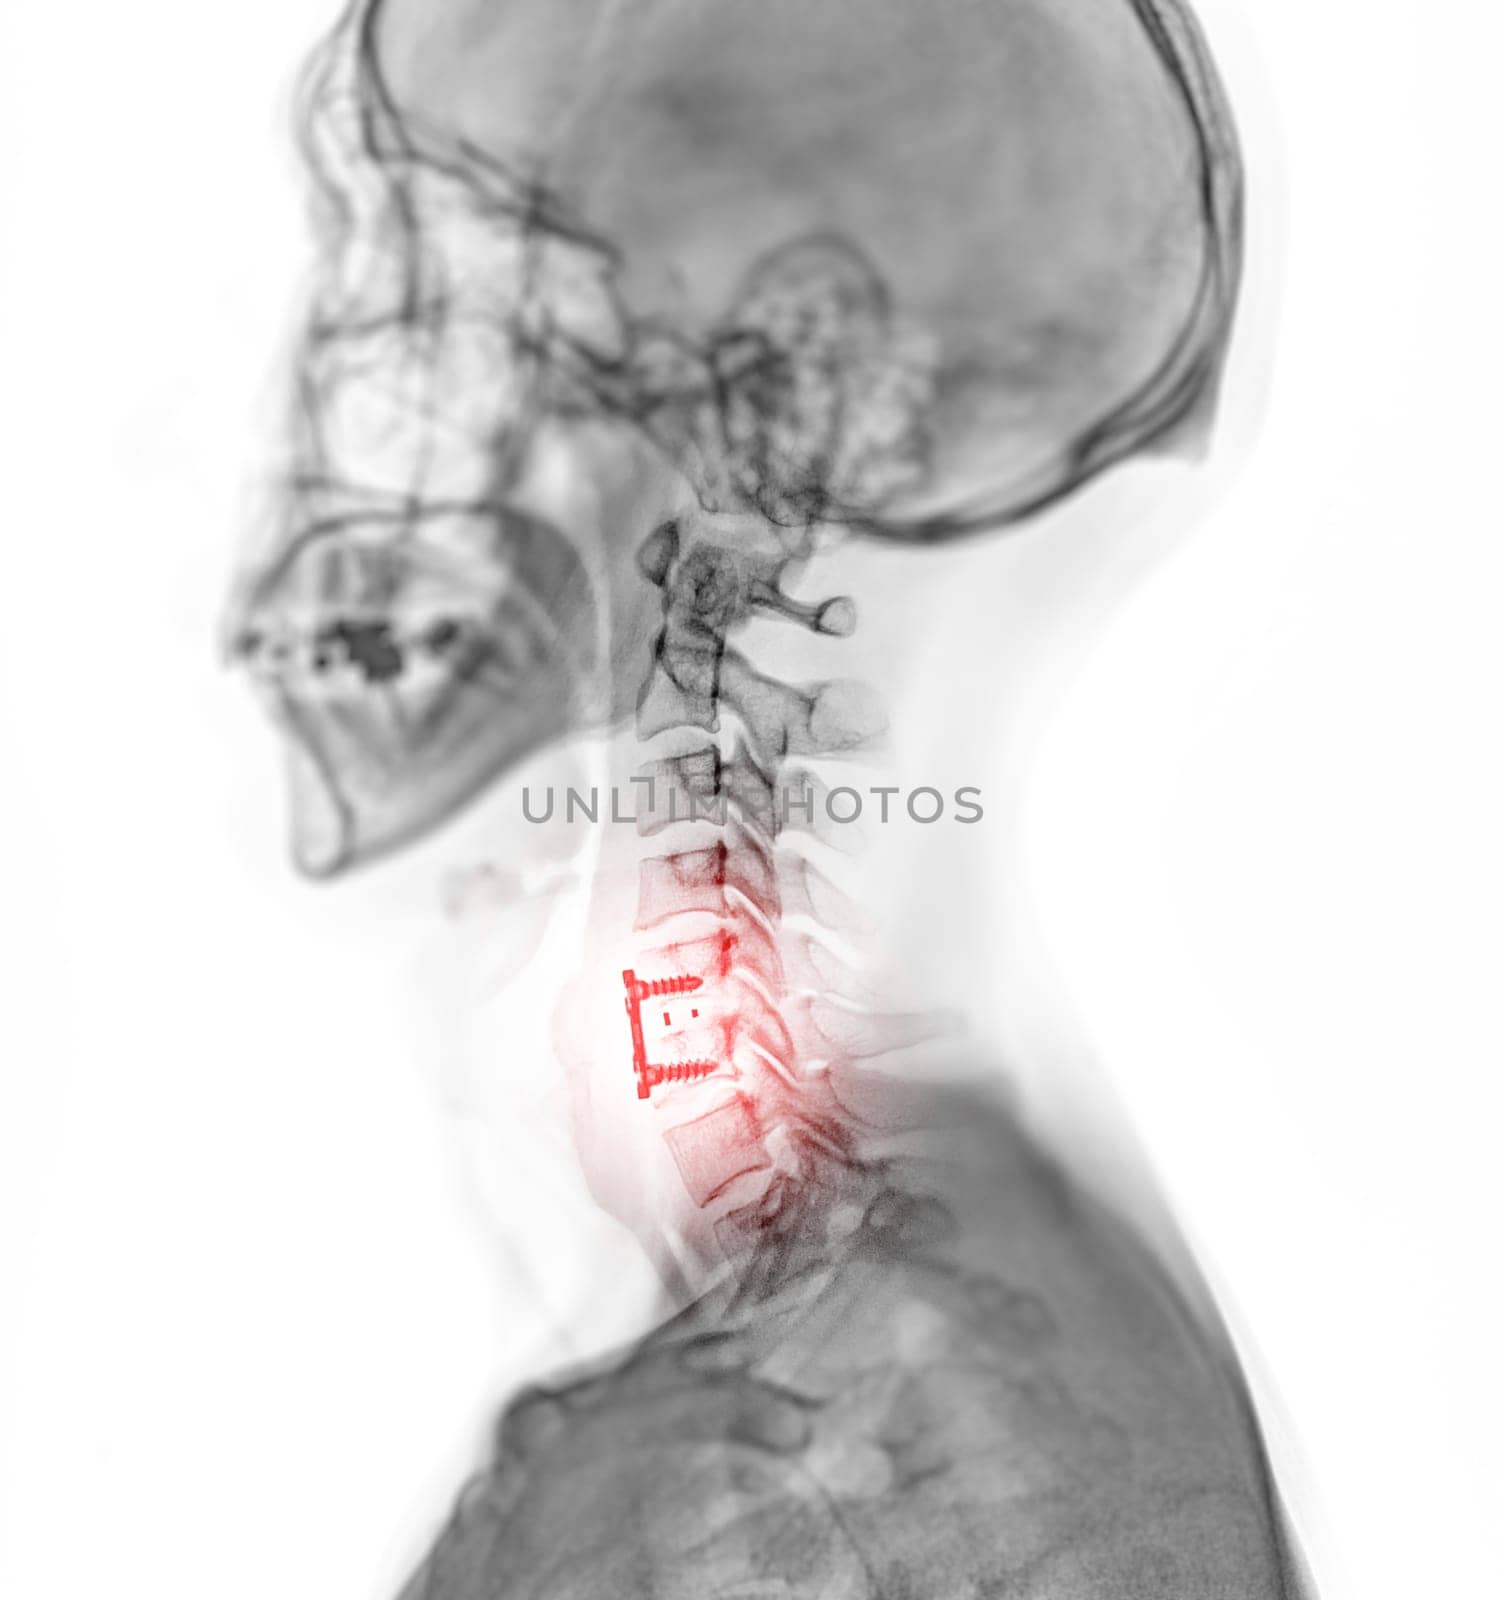 X-ray C-spine or x-ray image of Cervical spine lateral view showing fixed screw. by samunella